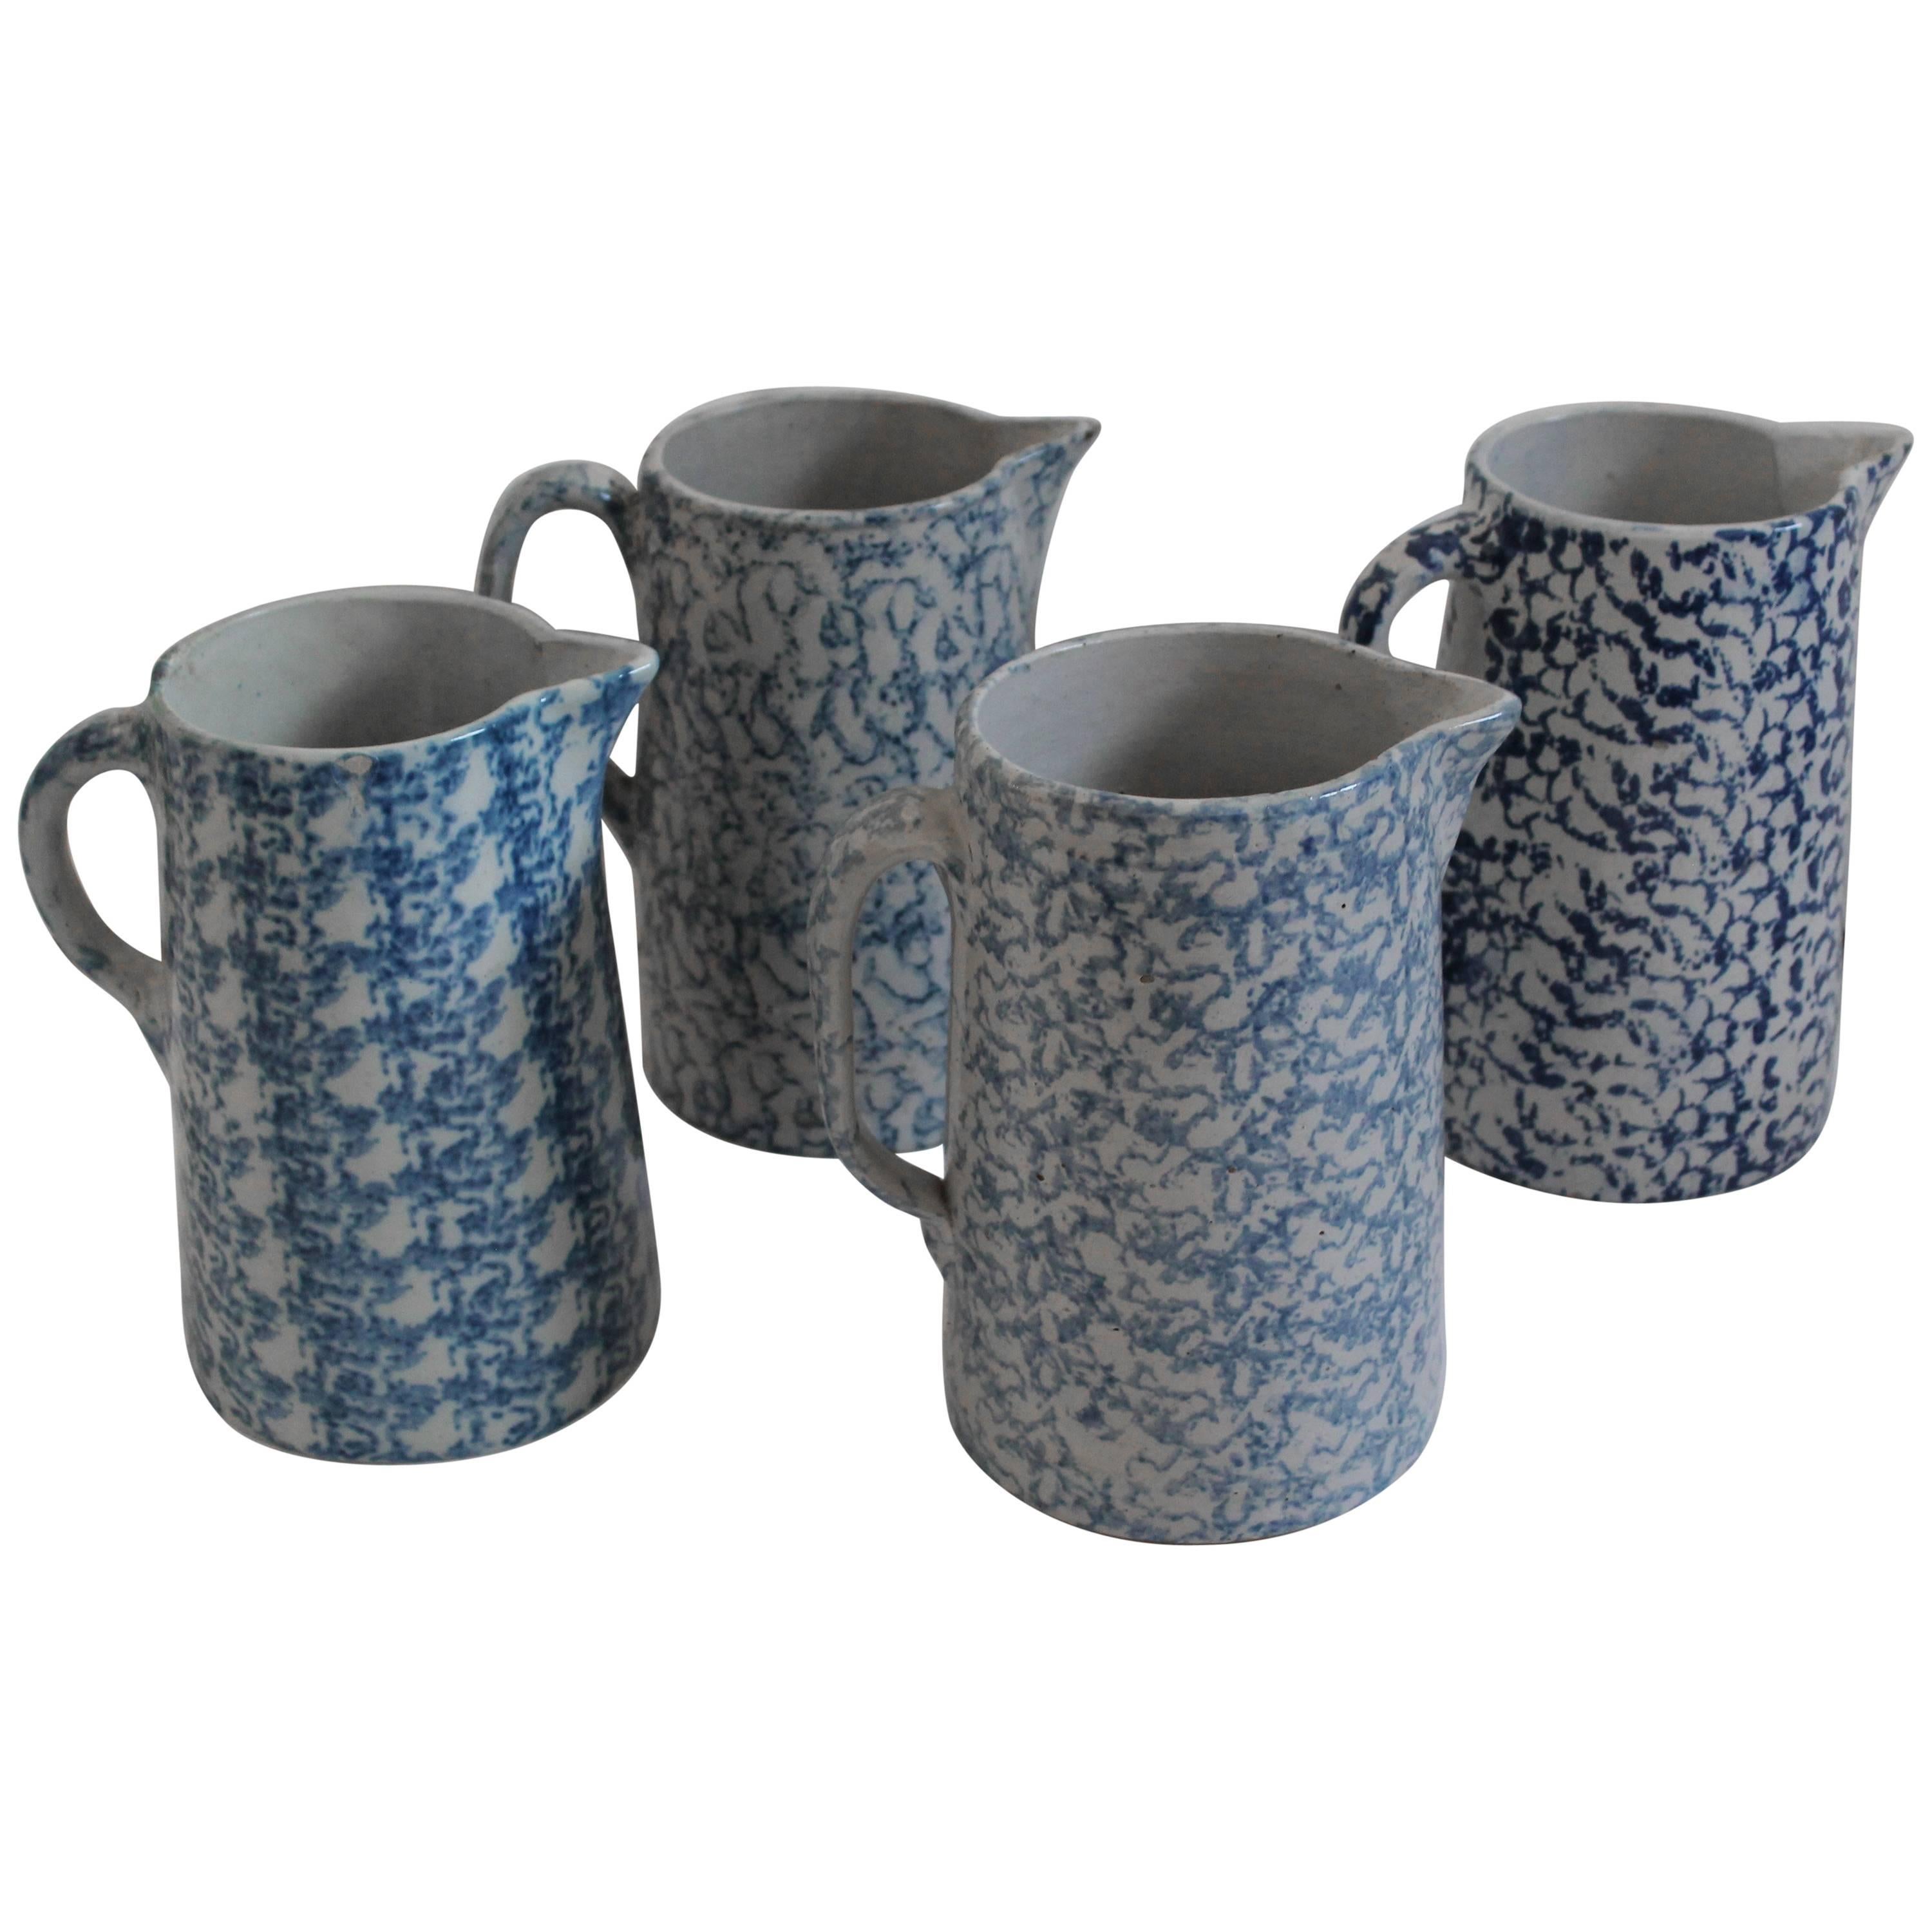 Collection of Four 19th Century Spongeware Pottery Pitchers